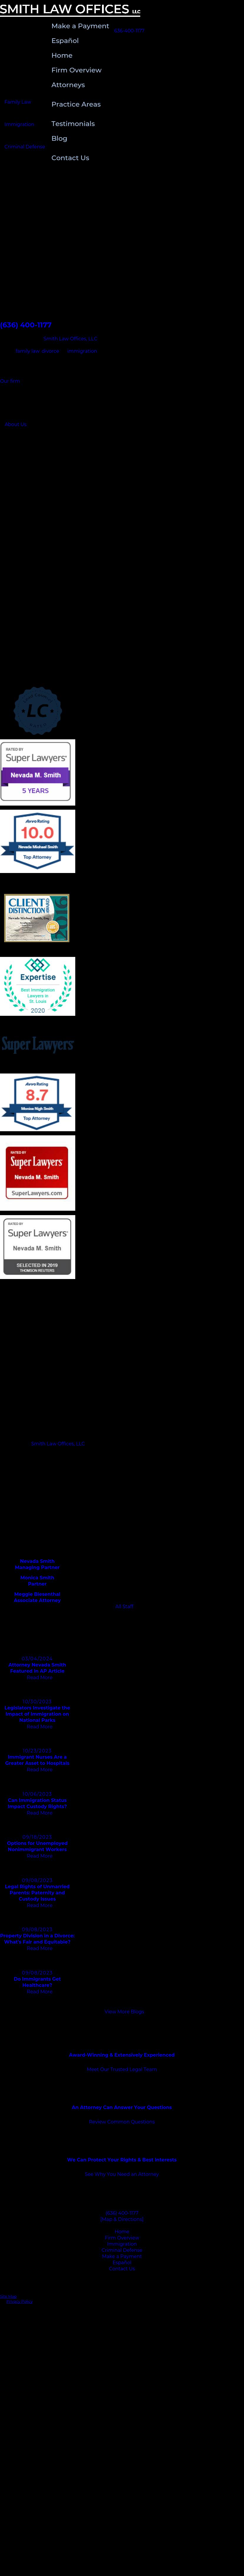 Smith Law Offices, LLC - Saint Charles MO Lawyers